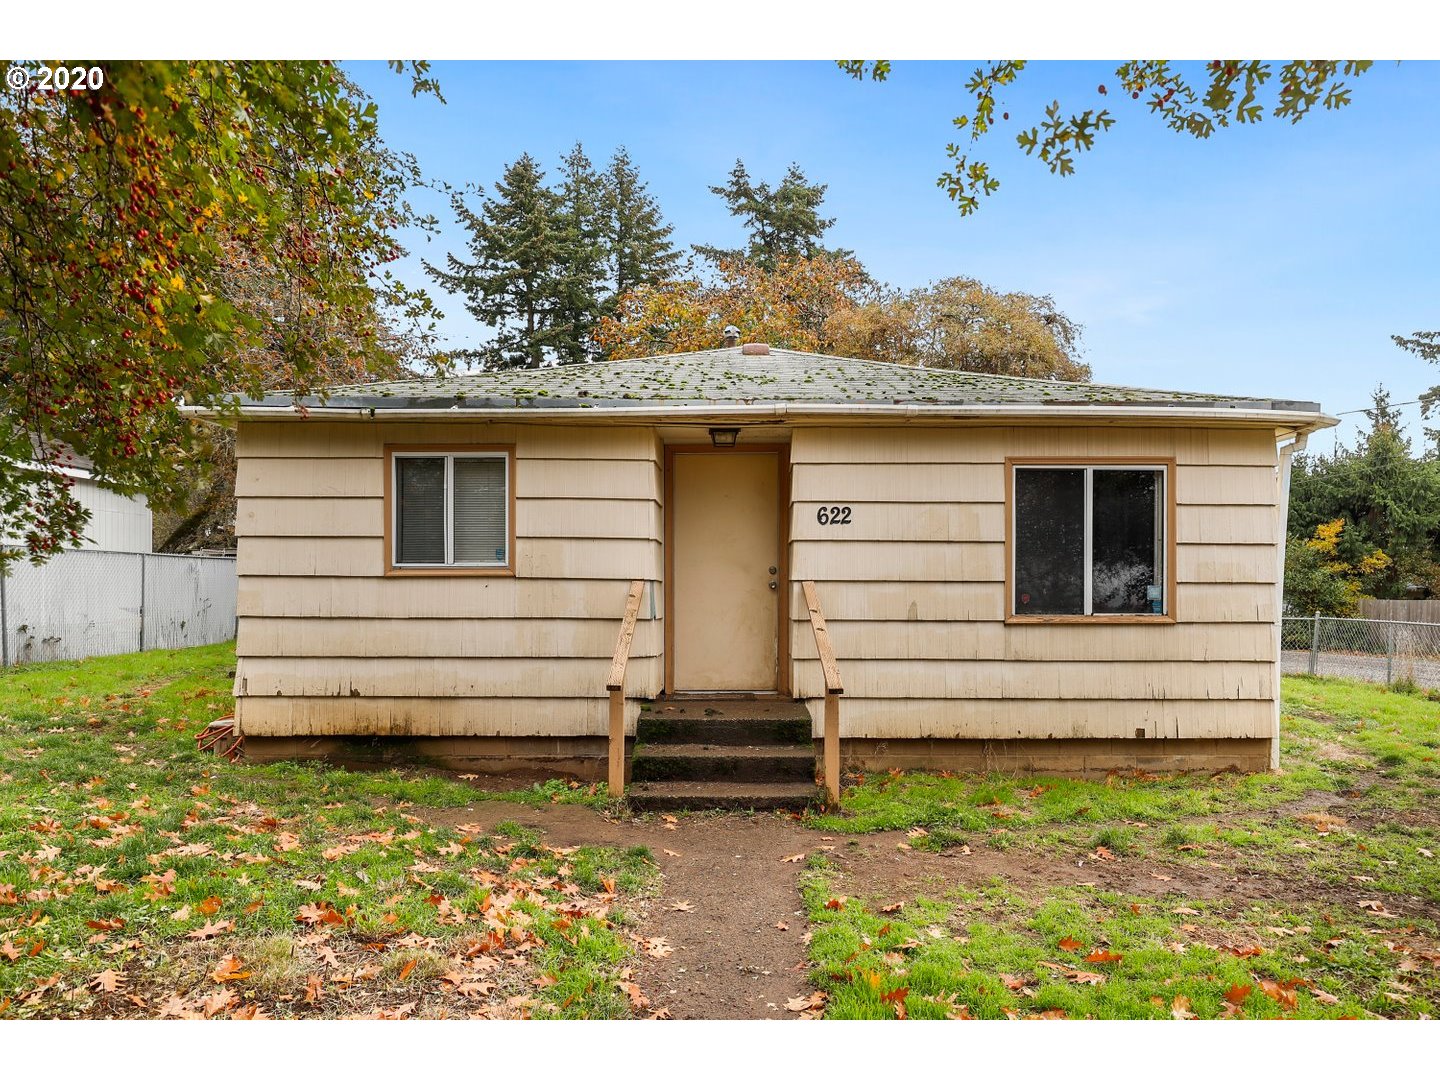 622 SE 111TH AVE (1 of 21)